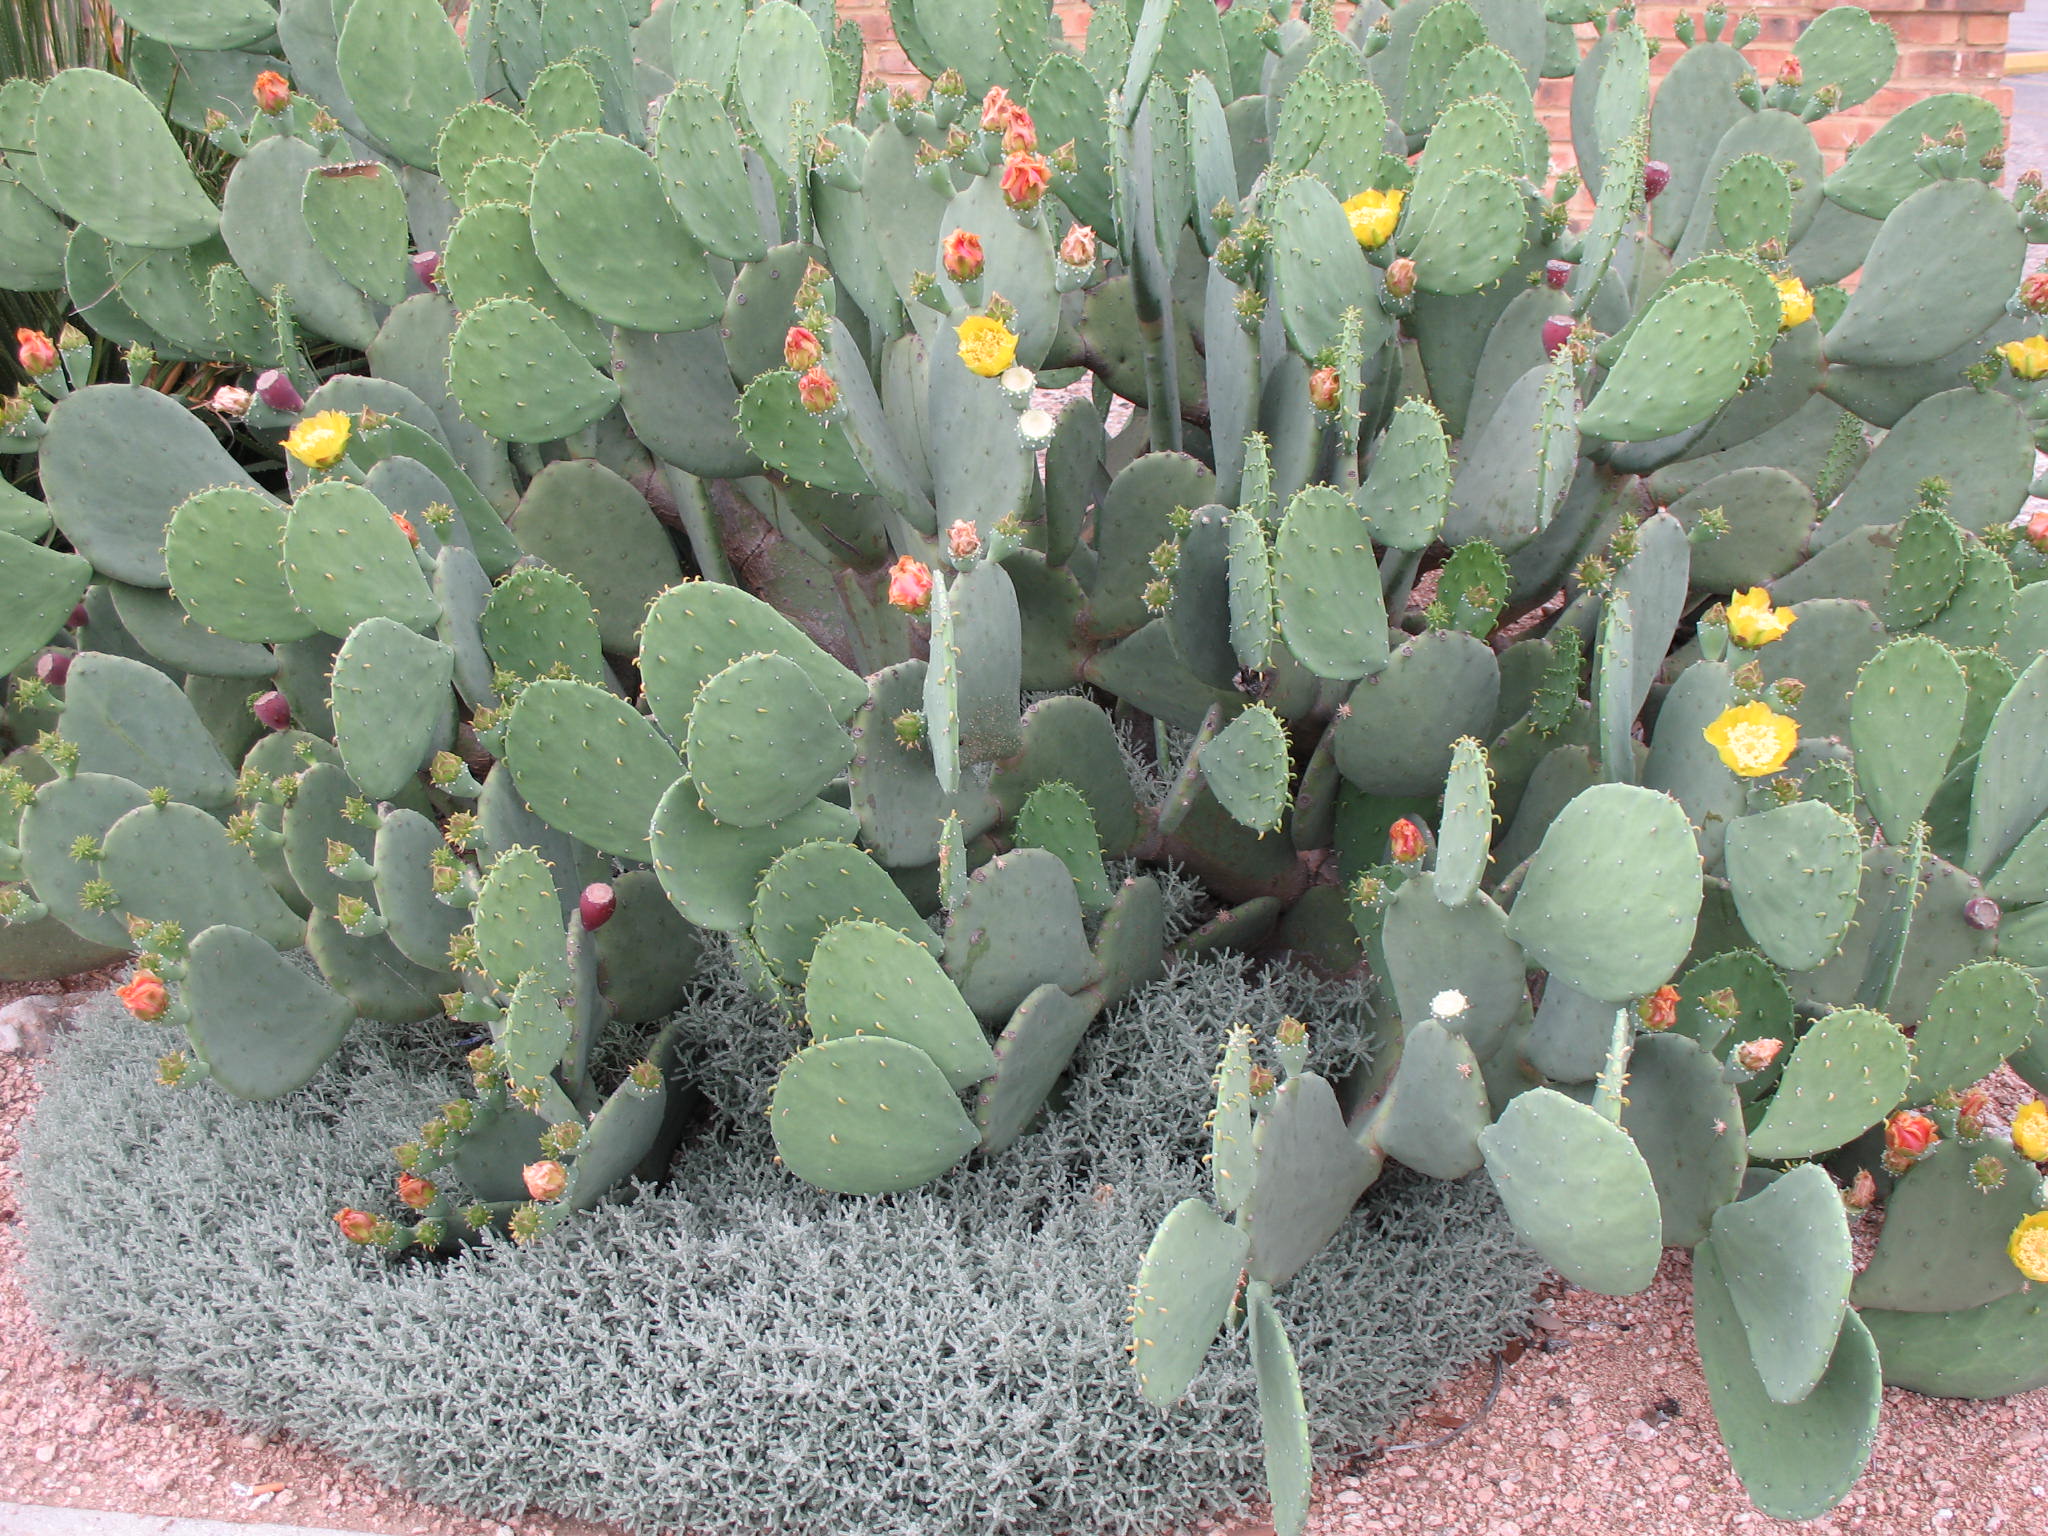 Online Plant Guide - Opuntia species / Prickly Pear Cactus